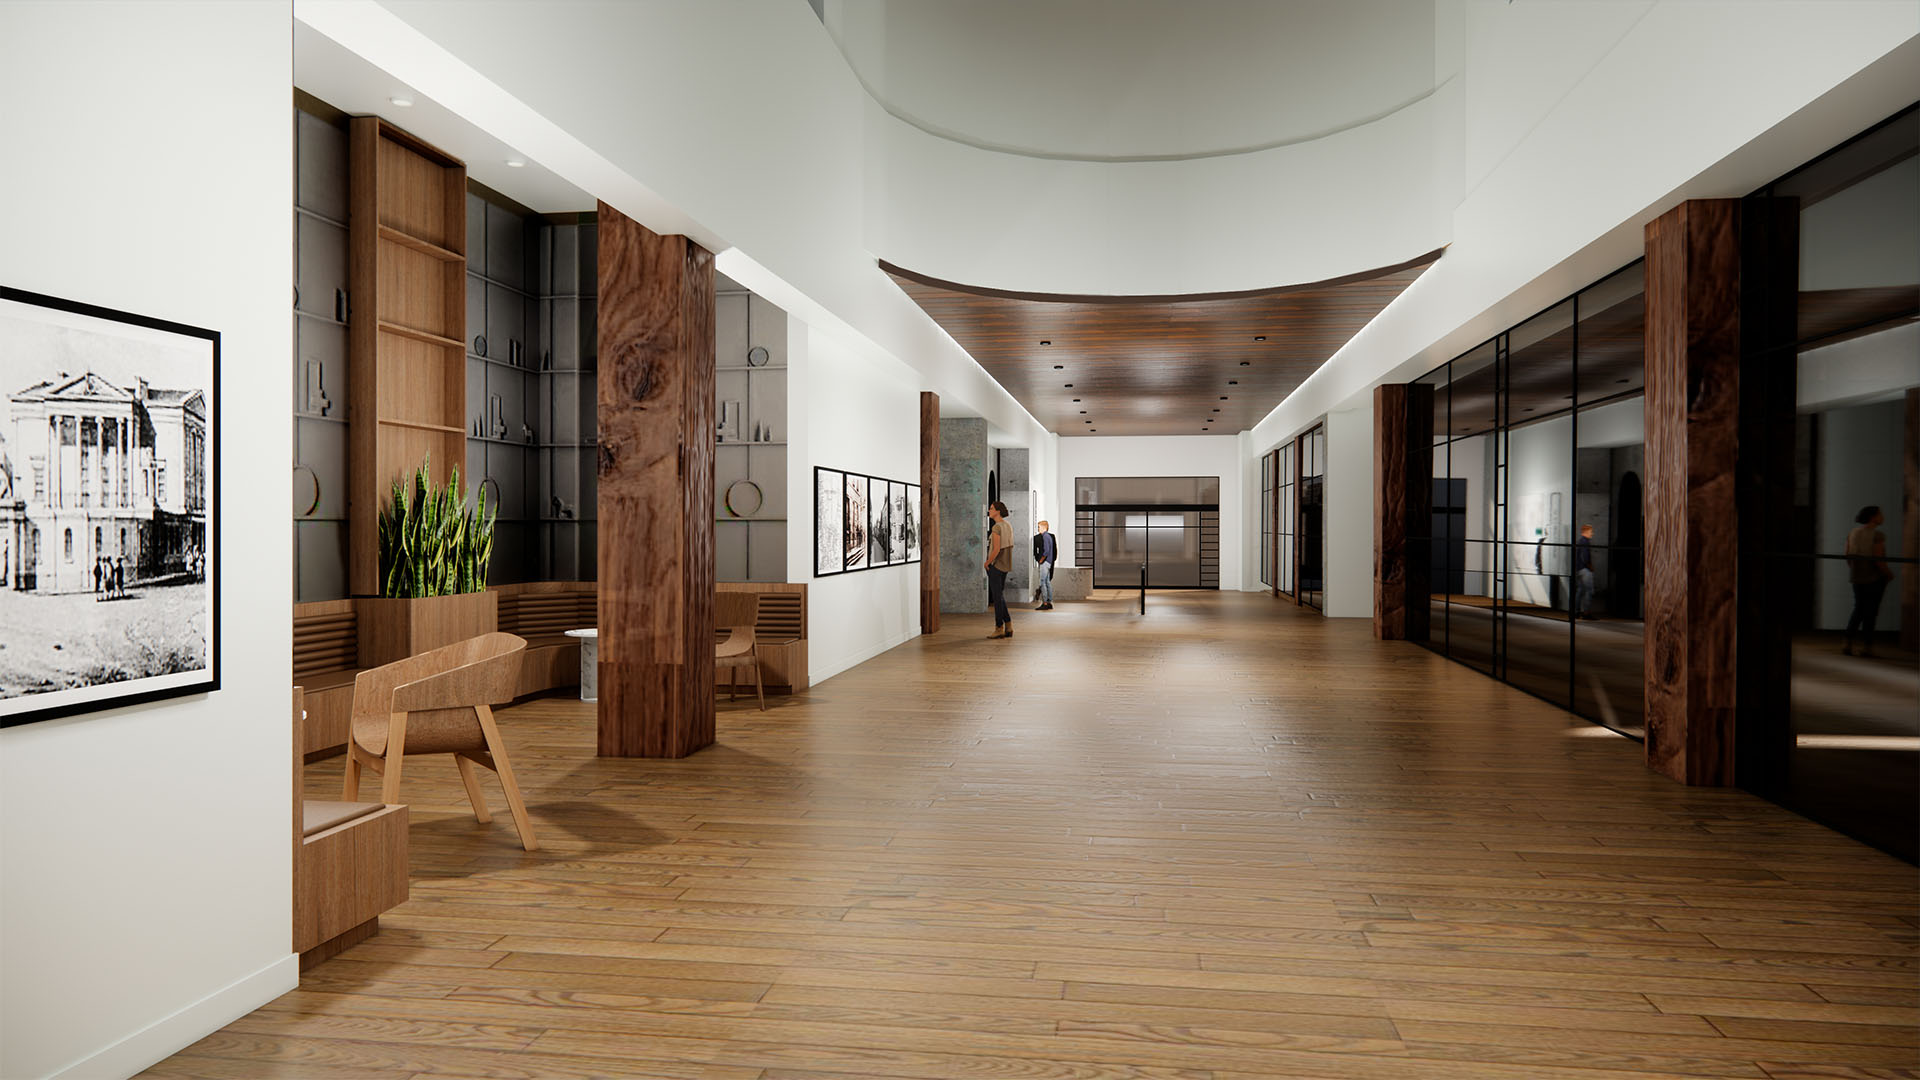 Interior Entry way design at 375 Water Street Vancouver, by Cutler Architecture Ltd